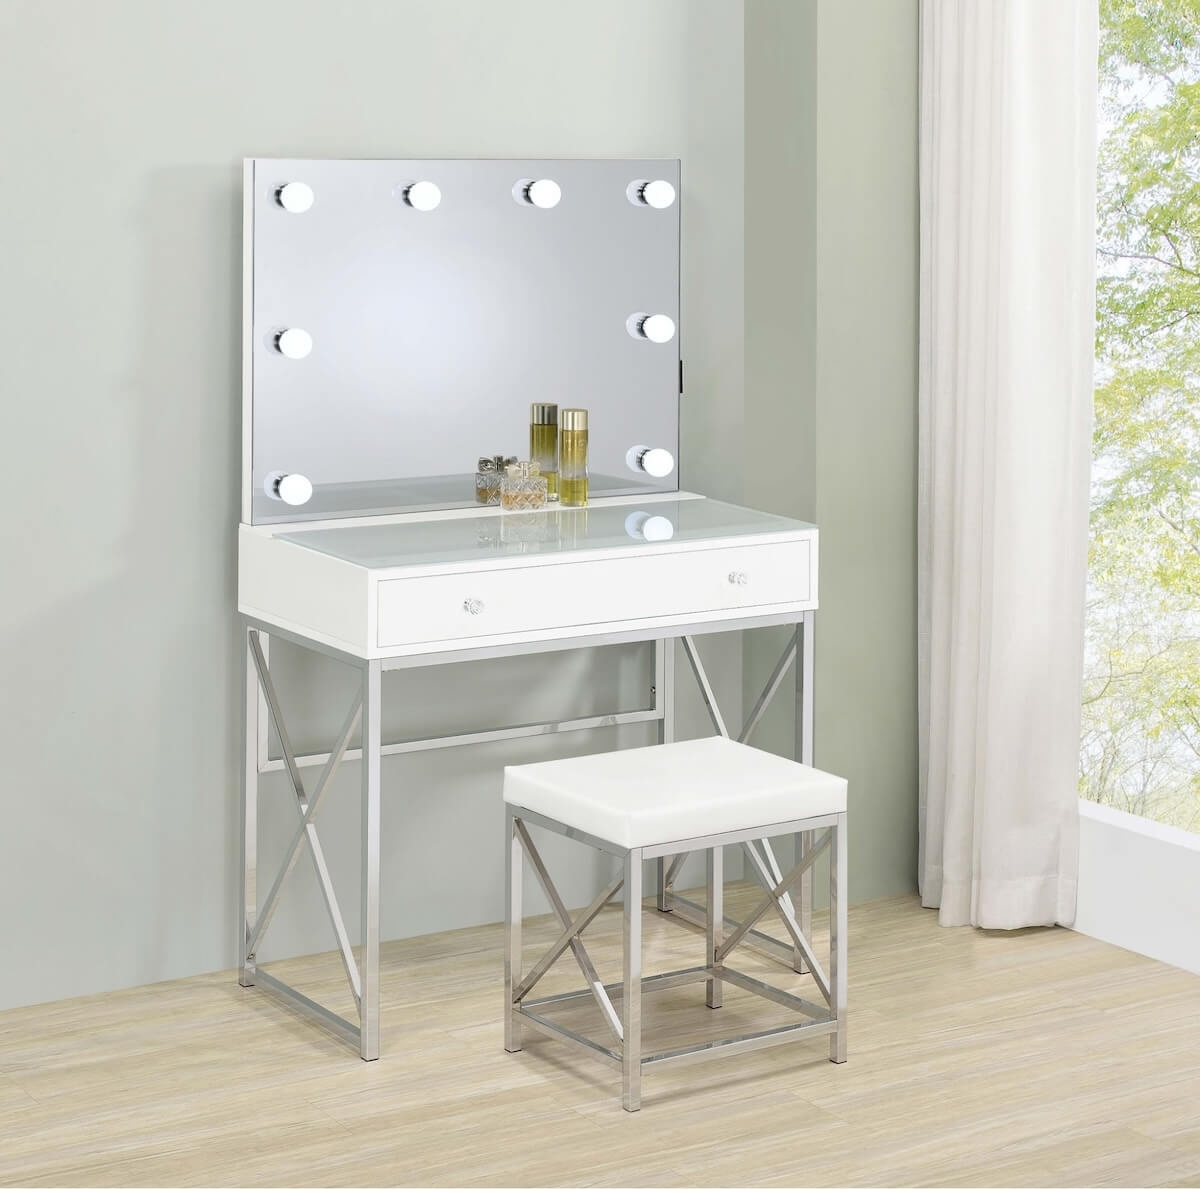 Modern makeup vanity: Eliza 2-piece Vanity Set with Hollywood Lighting White and Chrome